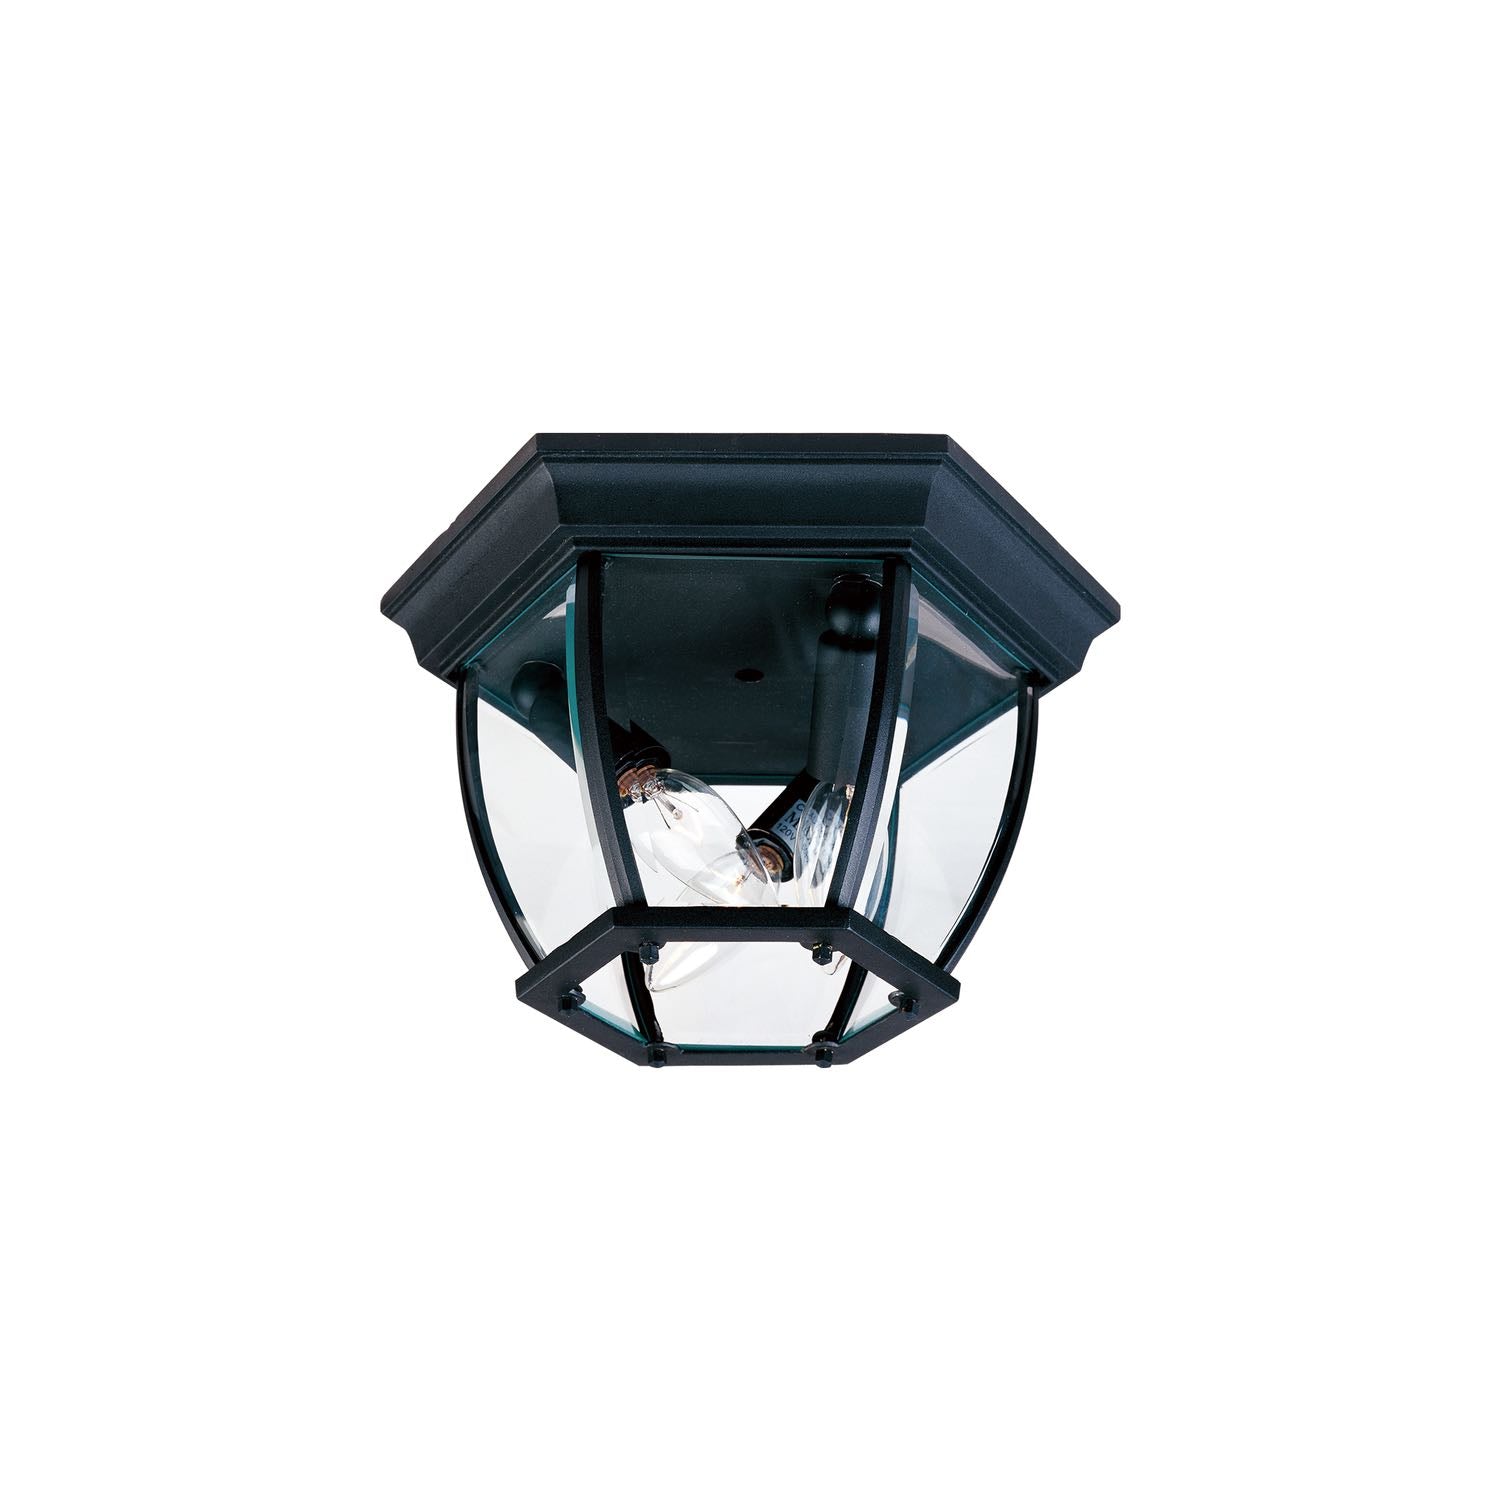 Crown Hill Outdoor Ceiling Light Black